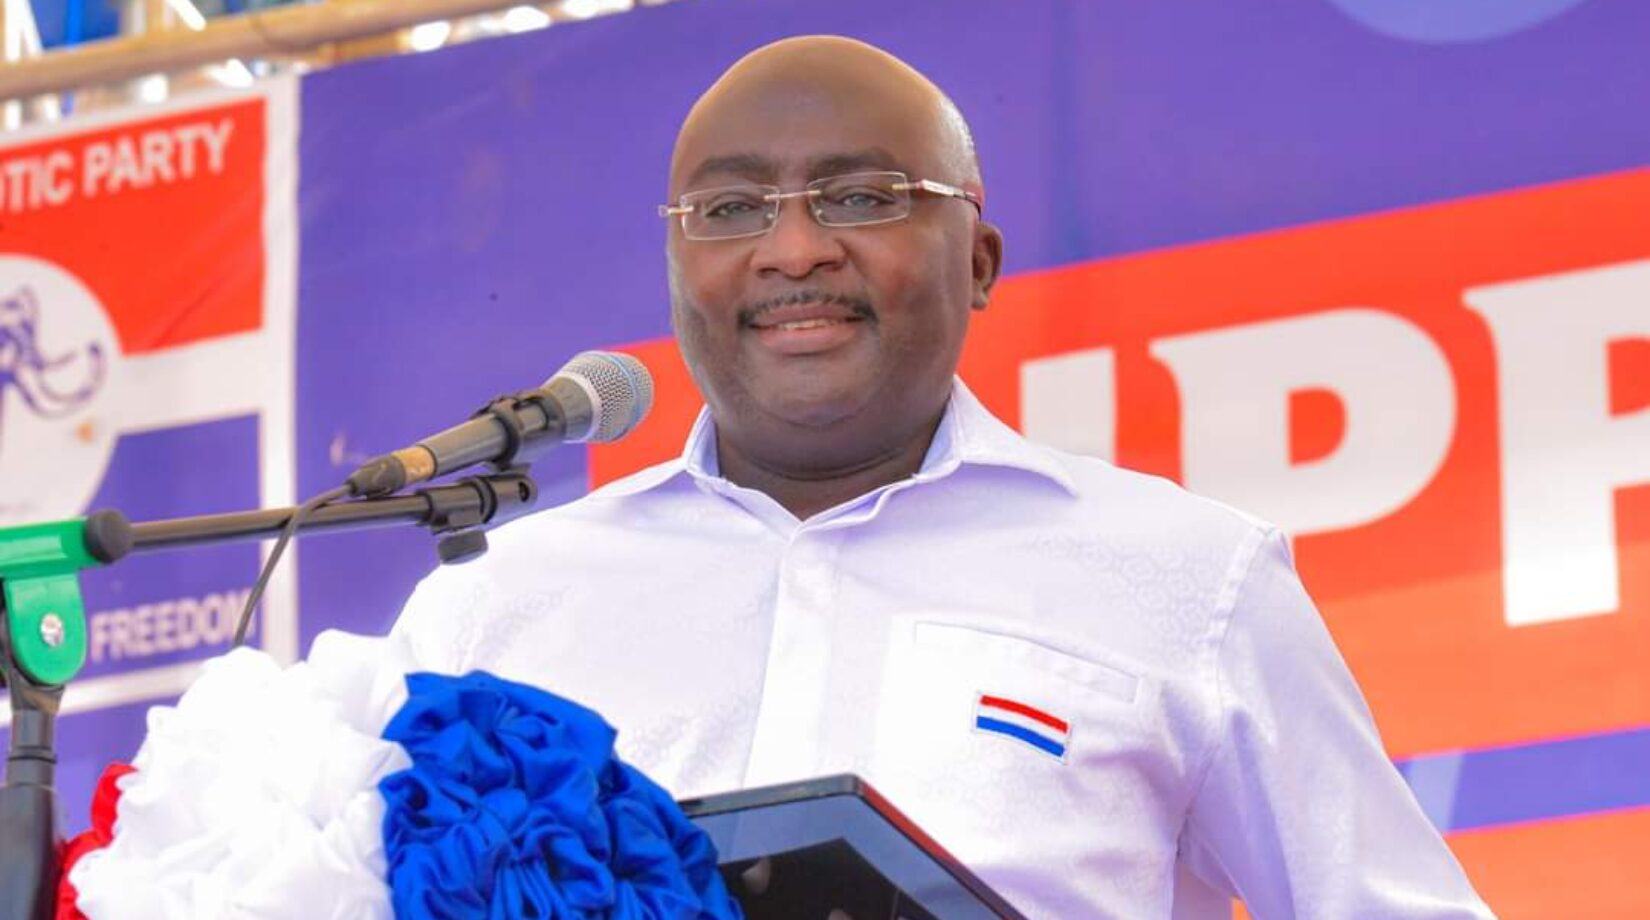 IMF BAILOUT SAGA:Dr. Bawumia to tender in Resignation as Head of EMT?